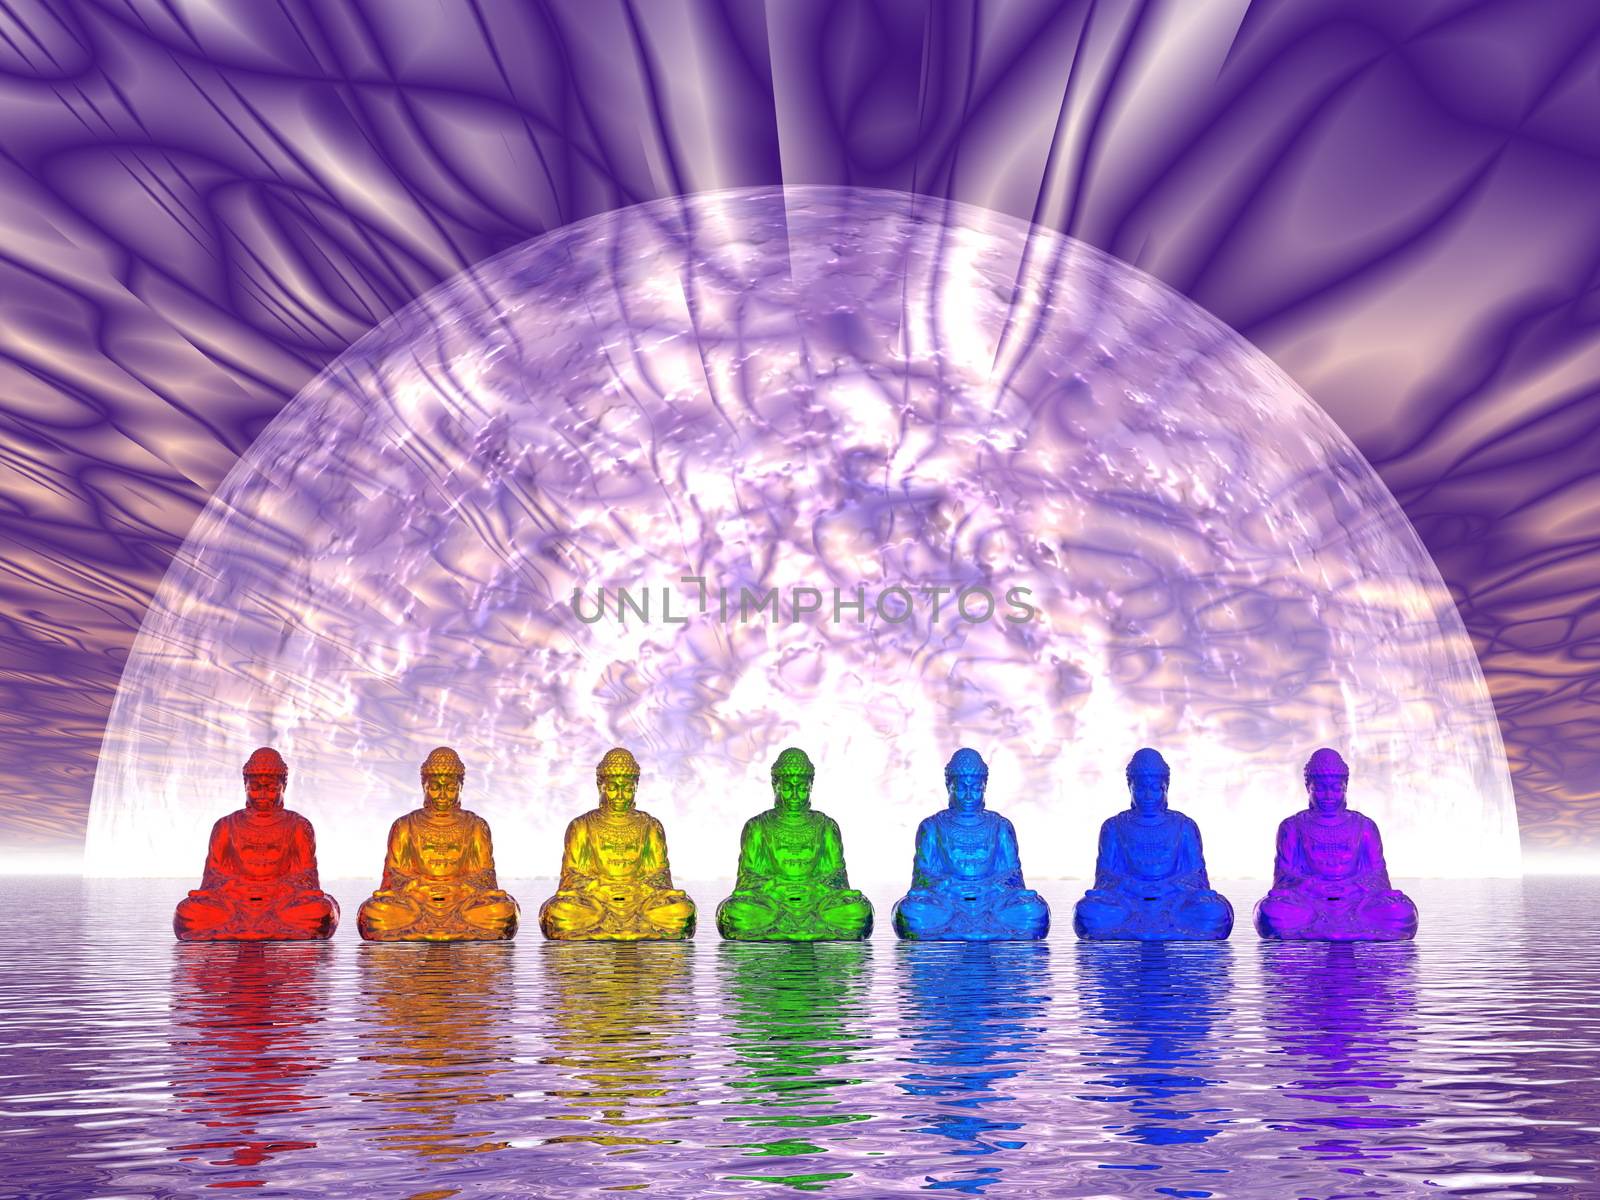 Seven small buddhas in chakra colors meditating upon water in front of big moon - 3D render